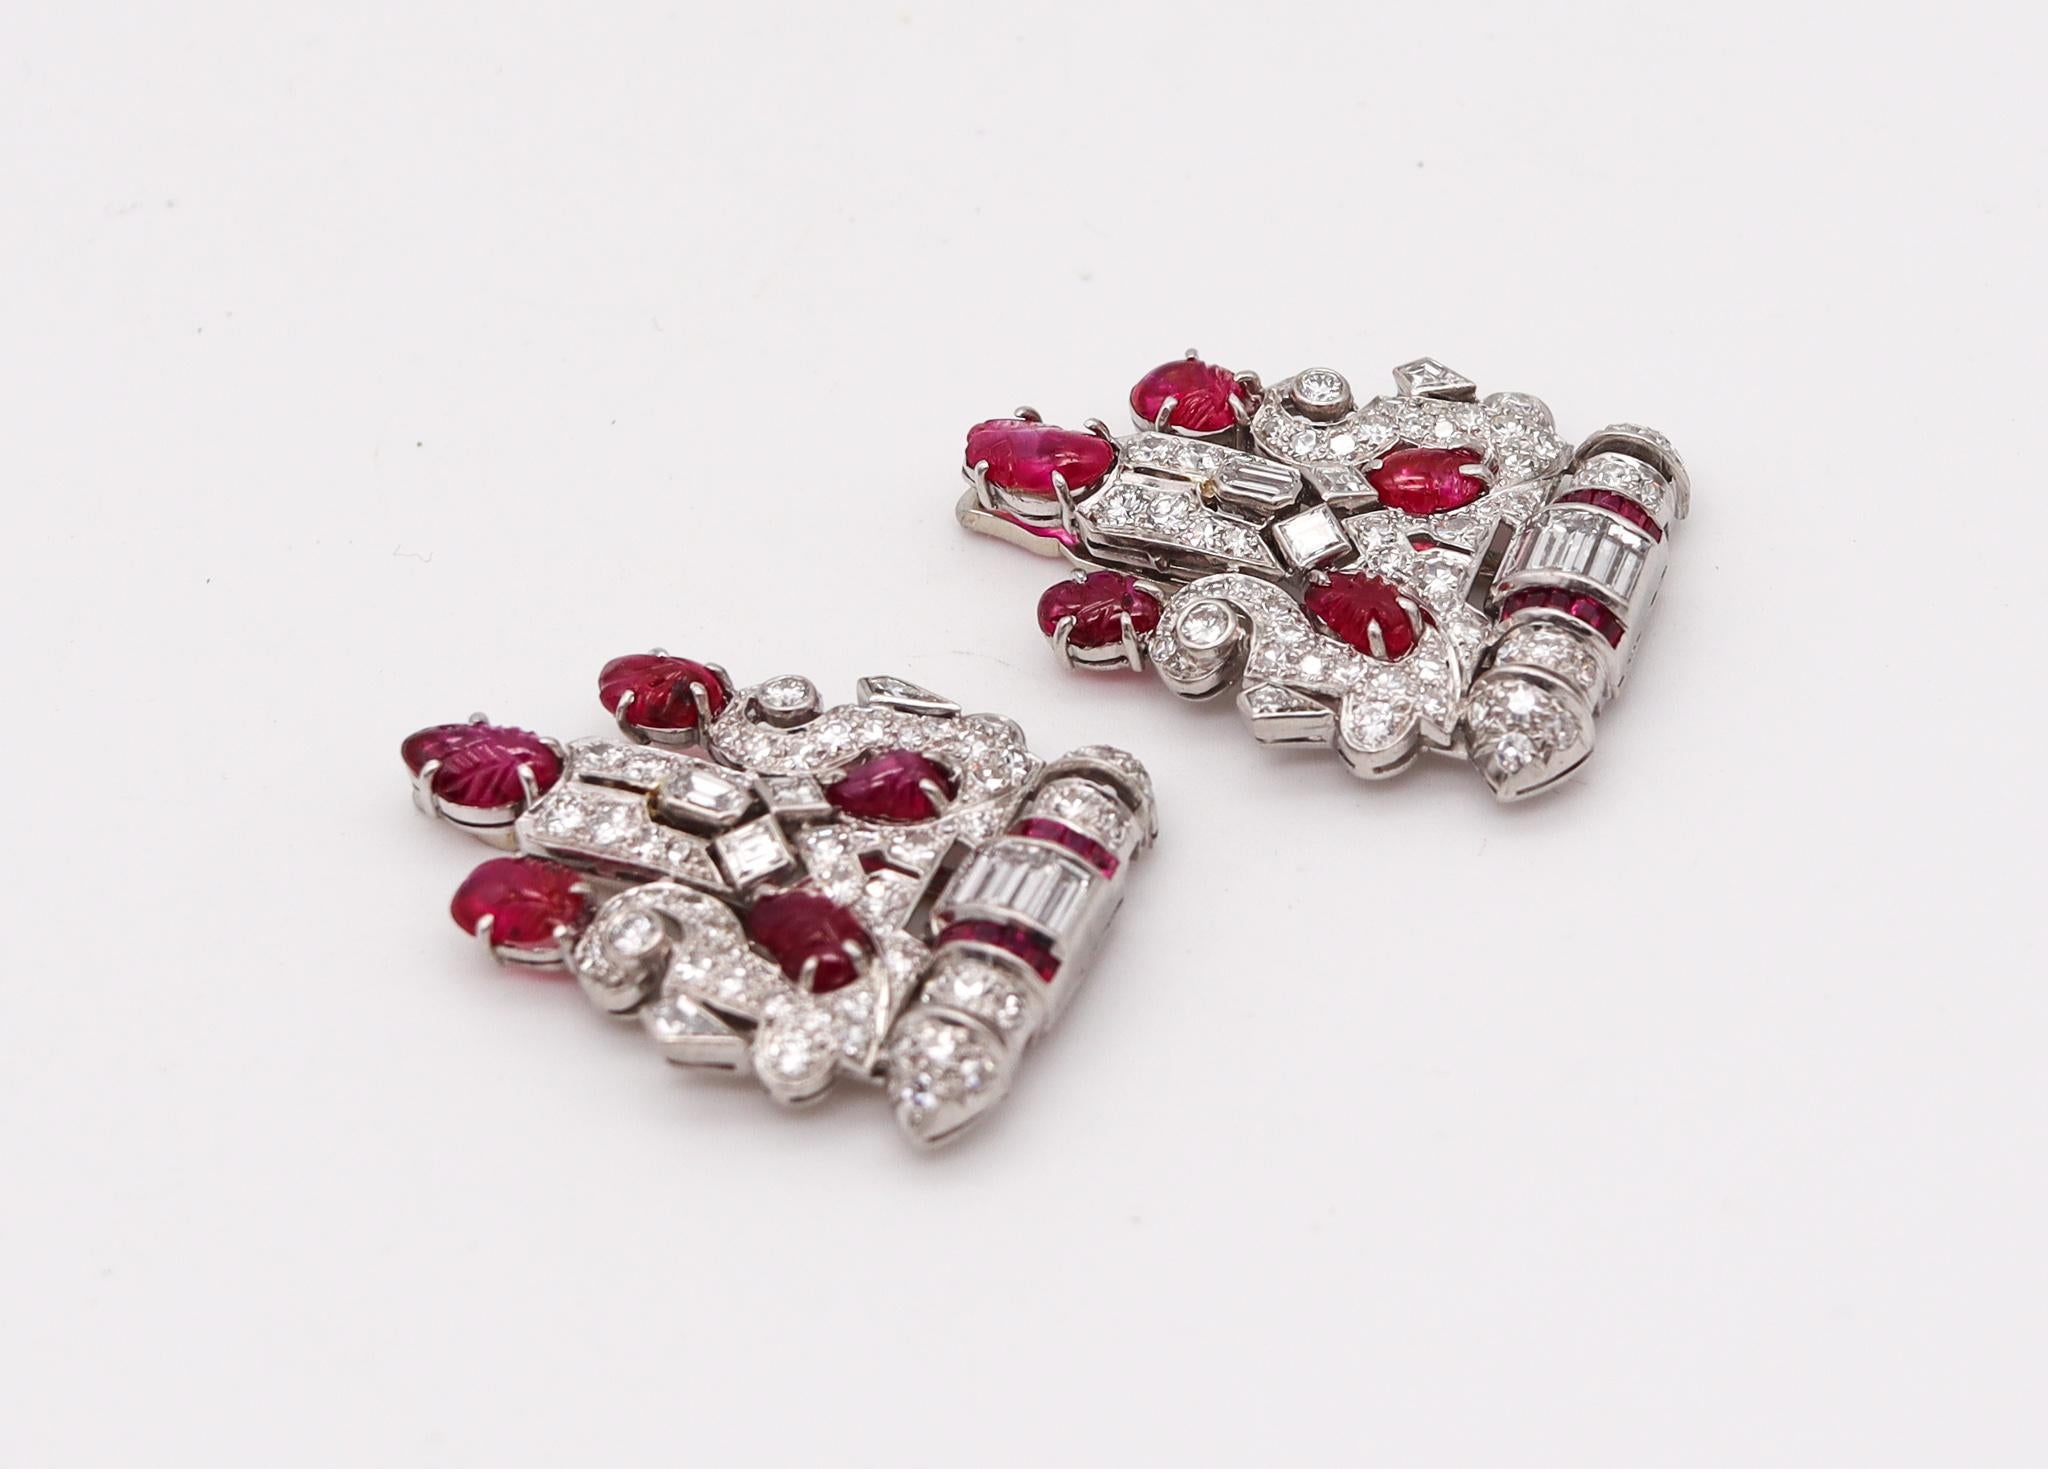 Old European Cut Art Deco 1925 Pair of Dress Clips in Platinum with 11.54 Ctw Diamonds and Rubies